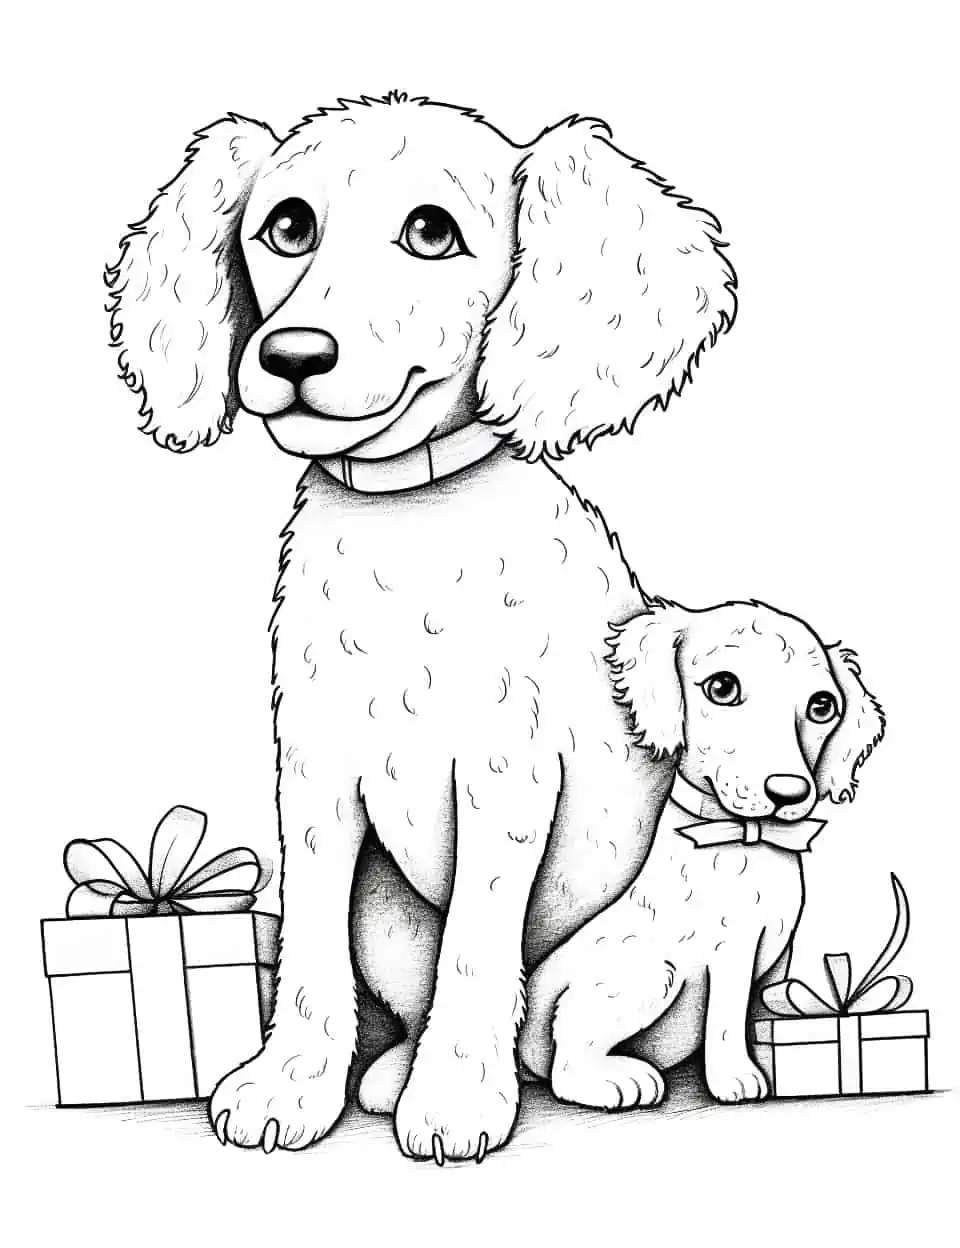 Christmas with Poodles Coloring Page - A couple of Poodles playfully waiting to open their Christmas gifts.